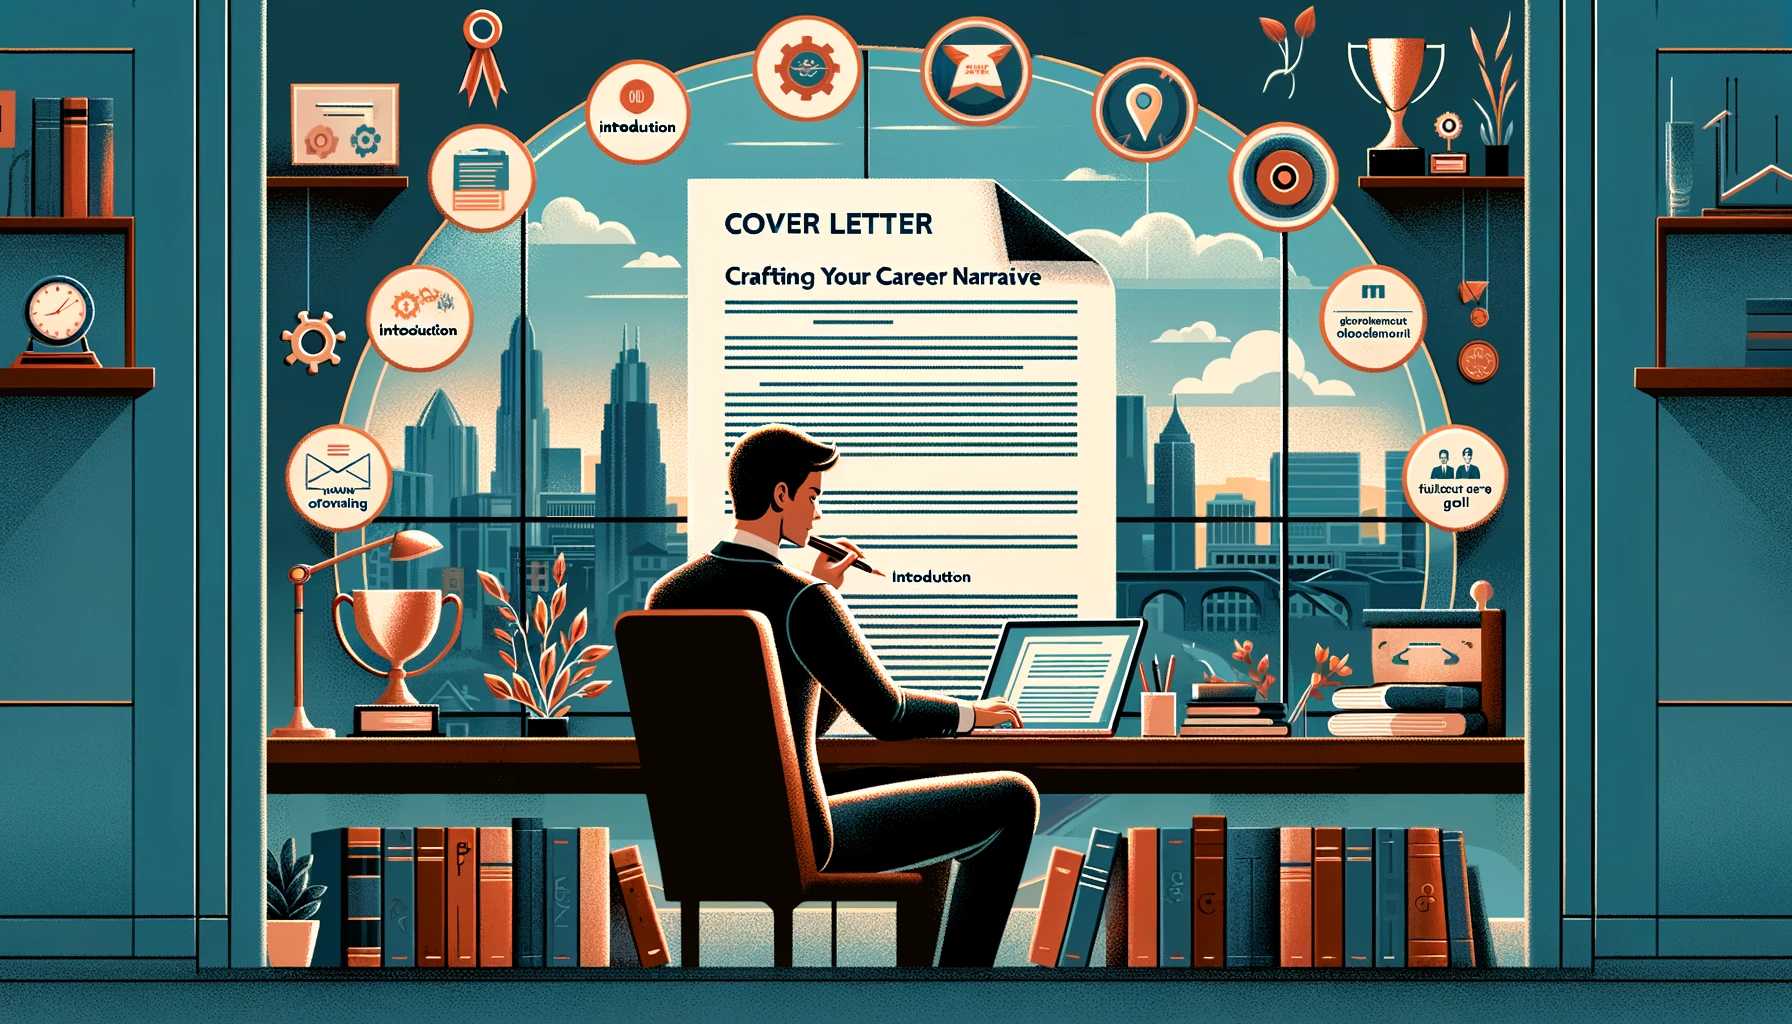 Professional Cover Letters: Crafting Your Career Narrative